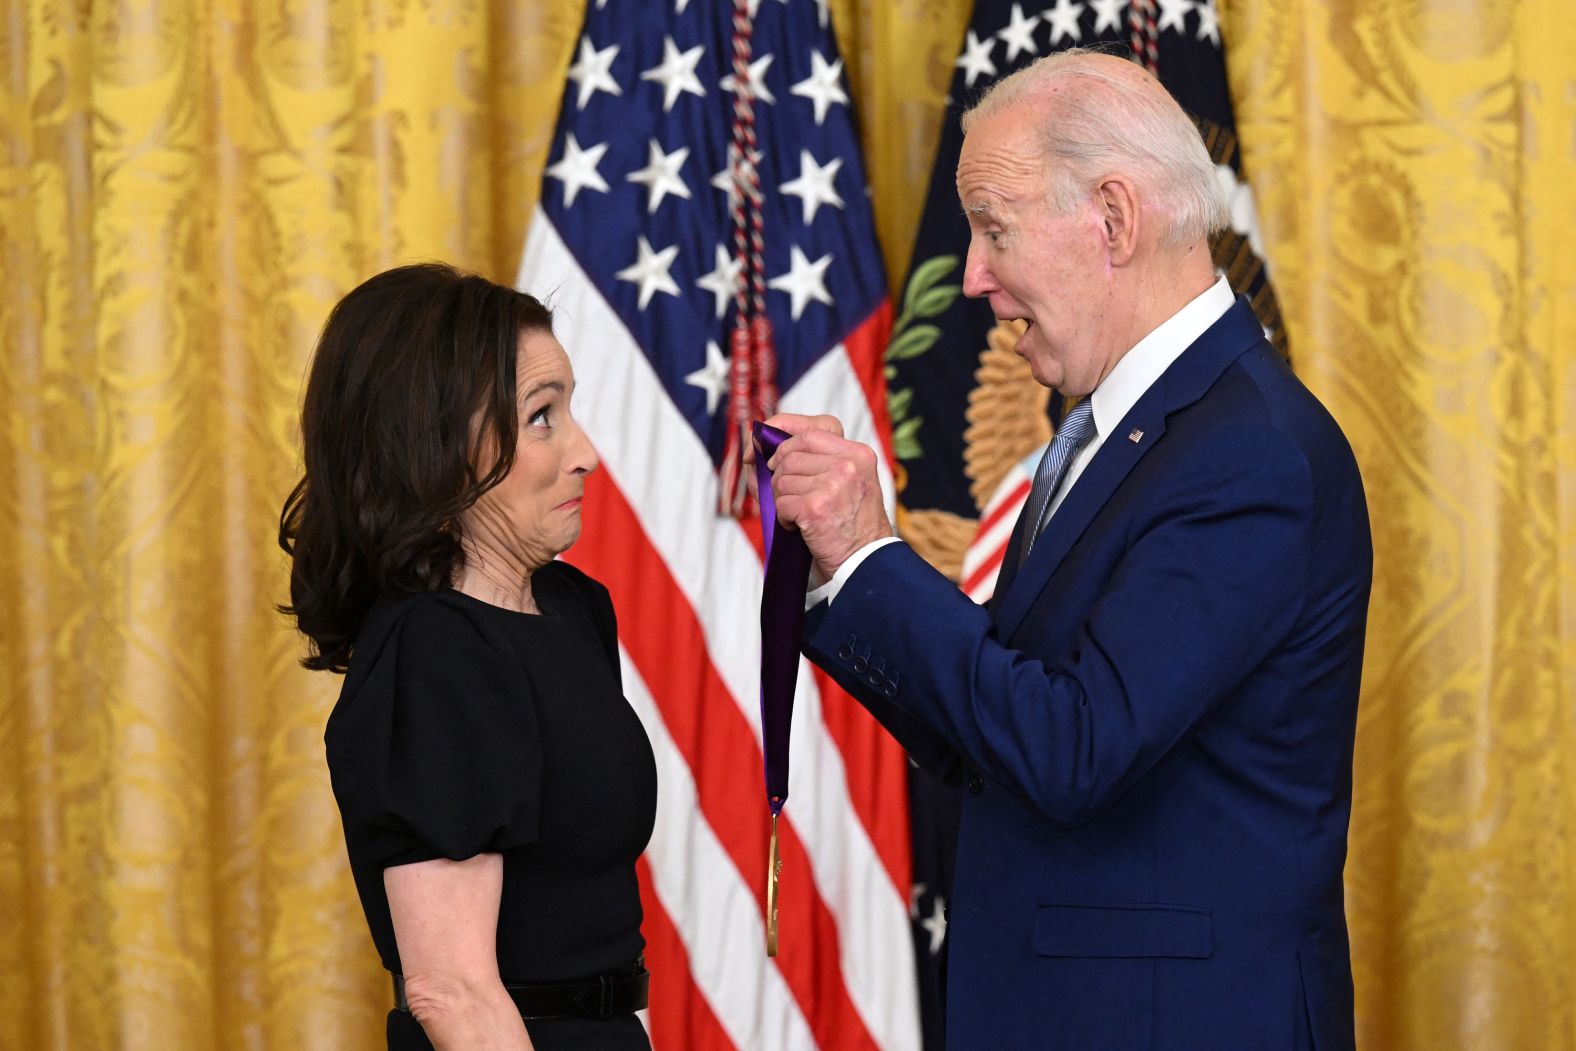 US President Joe Biden awards actress Julia Louis-Dreyfus with the National Medal of Arts during a White House ceremony on Tuesday, March 21. She was one of <a href="index.php?page=&url=https%3A%2F%2Fwww.cnn.com%2F2023%2F03%2F20%2Fpolitics%2Fbiden-national-arts-and-humanities-medal-ceremony%2Findex.html" target="_blank">12 artists and groups who received the honor</a> on Tuesday. Other recipients included actress Mindy Kaling, designer Vera Wang and singers Bruce Springsteen and Gladys Knight.